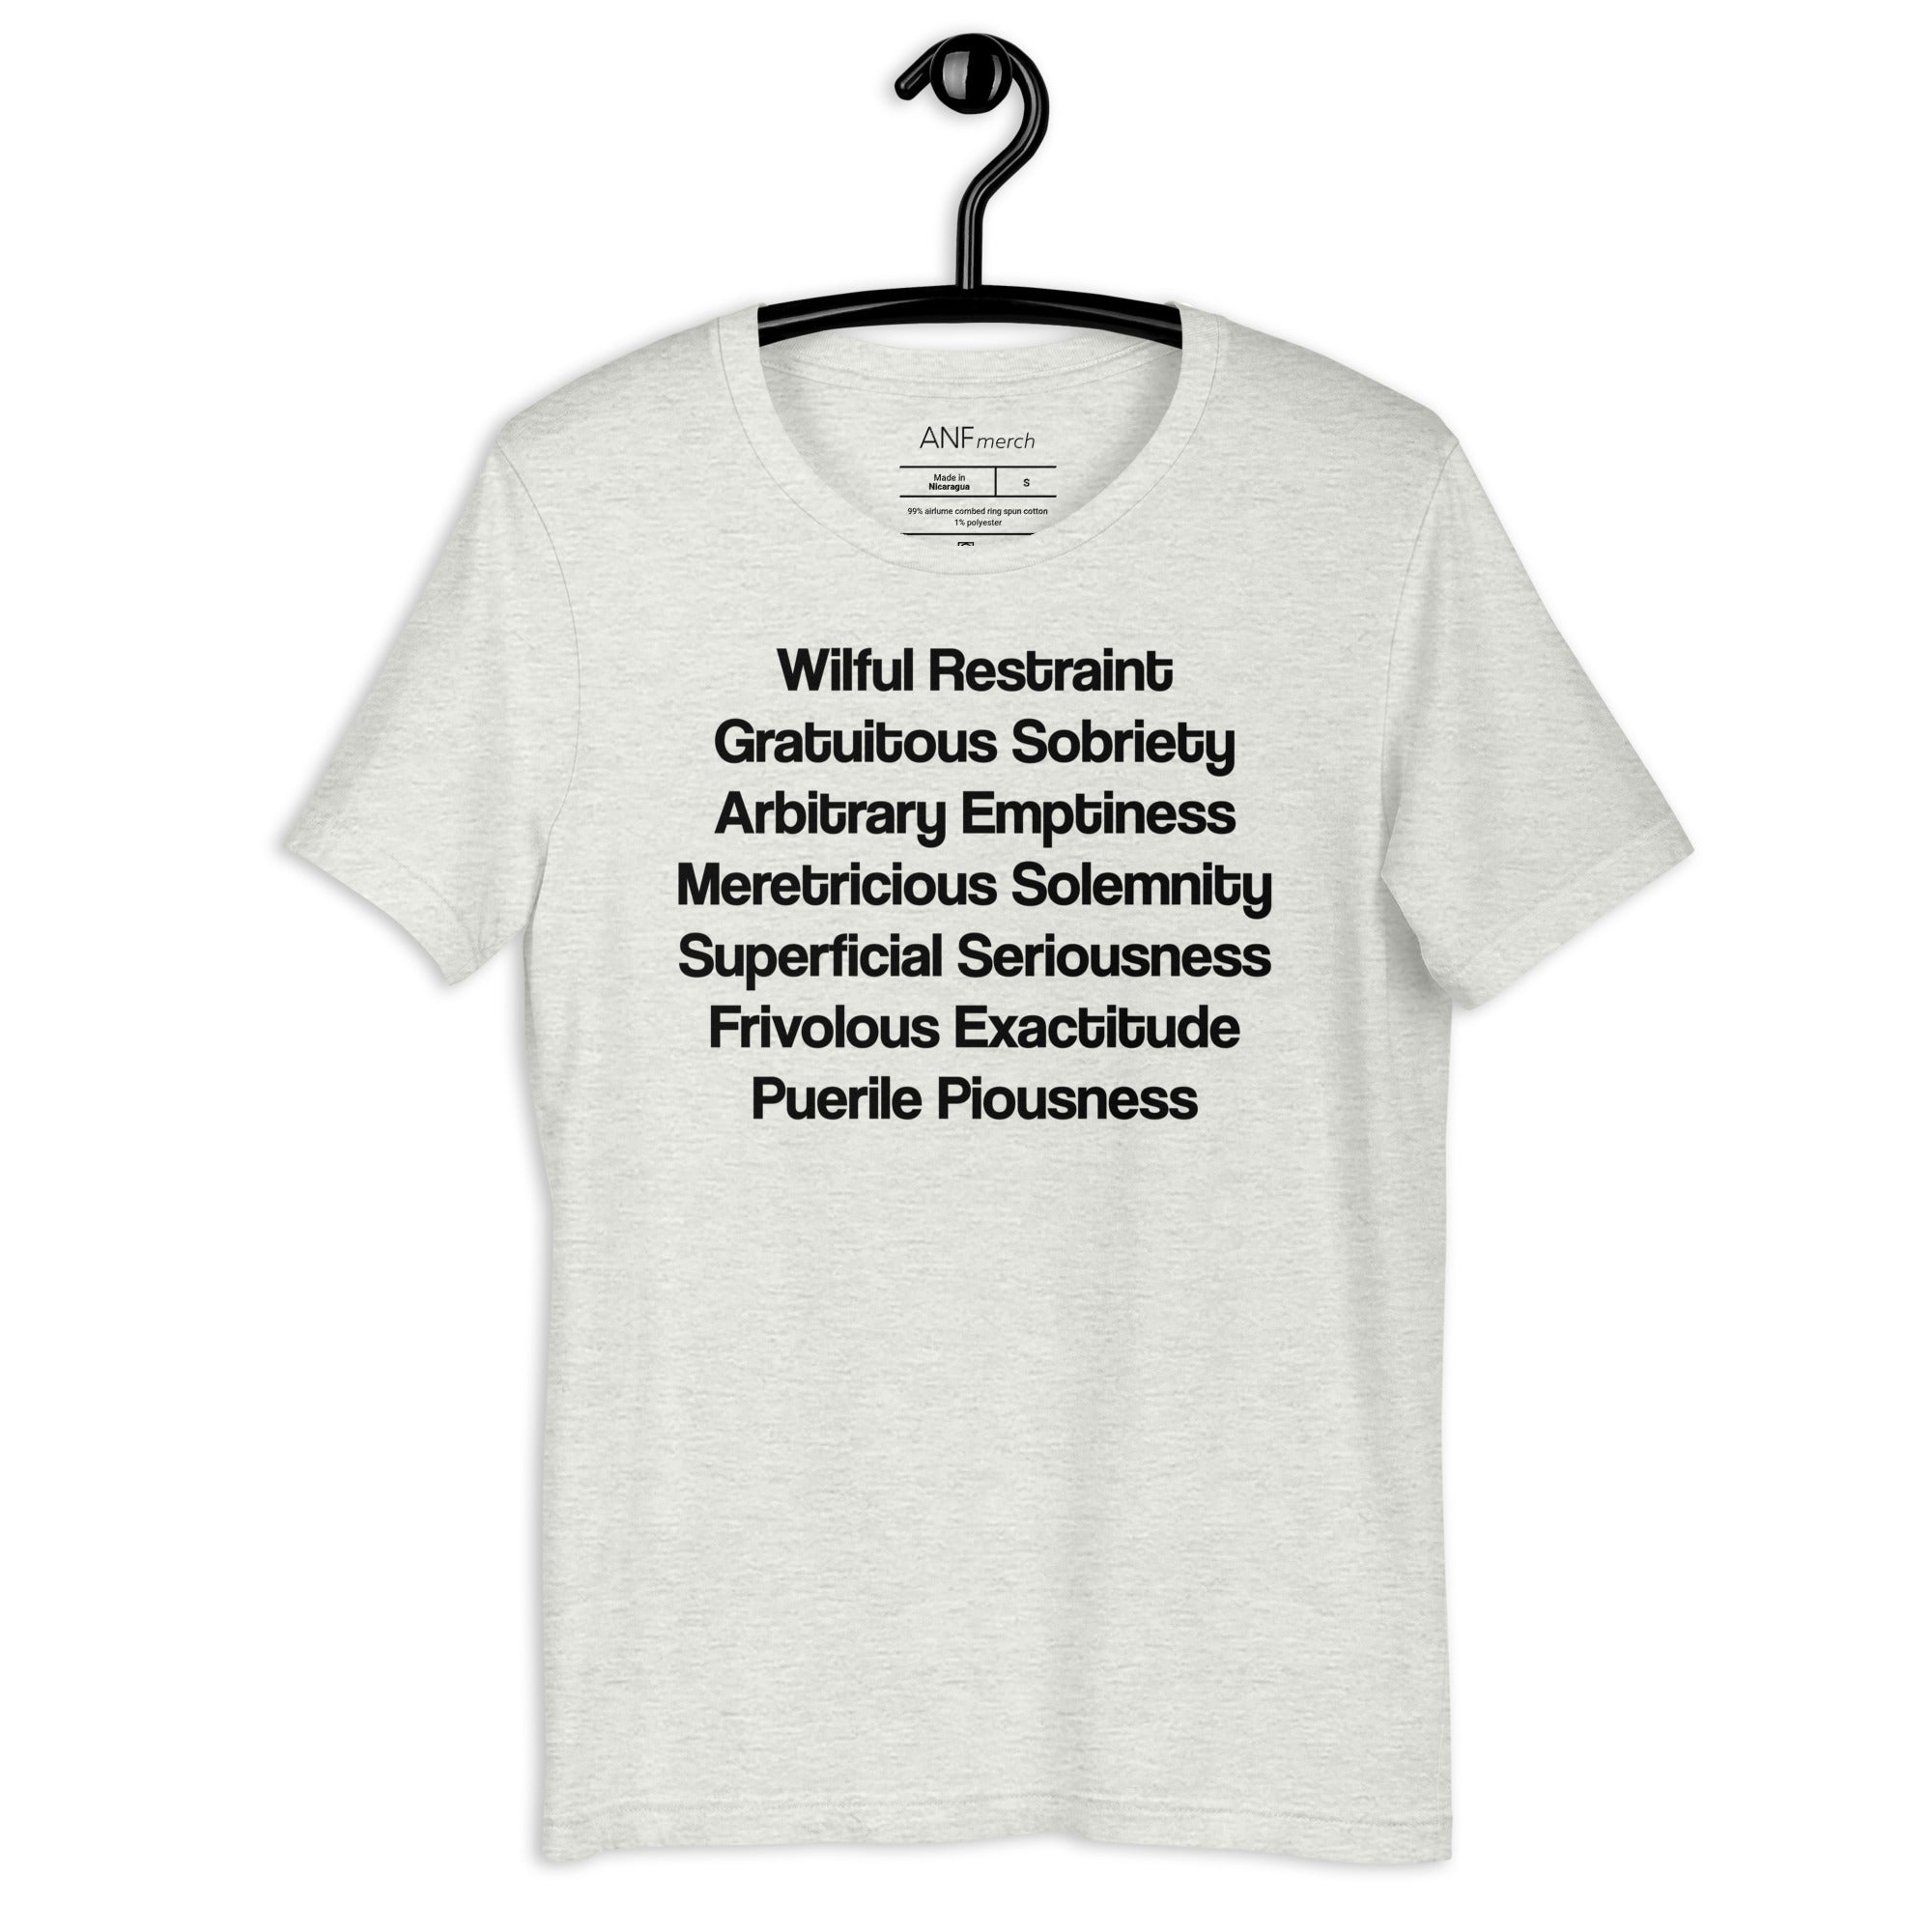 The Seven Deadly Sins of Architecture & Design Front & Back Unisex T-Shirts